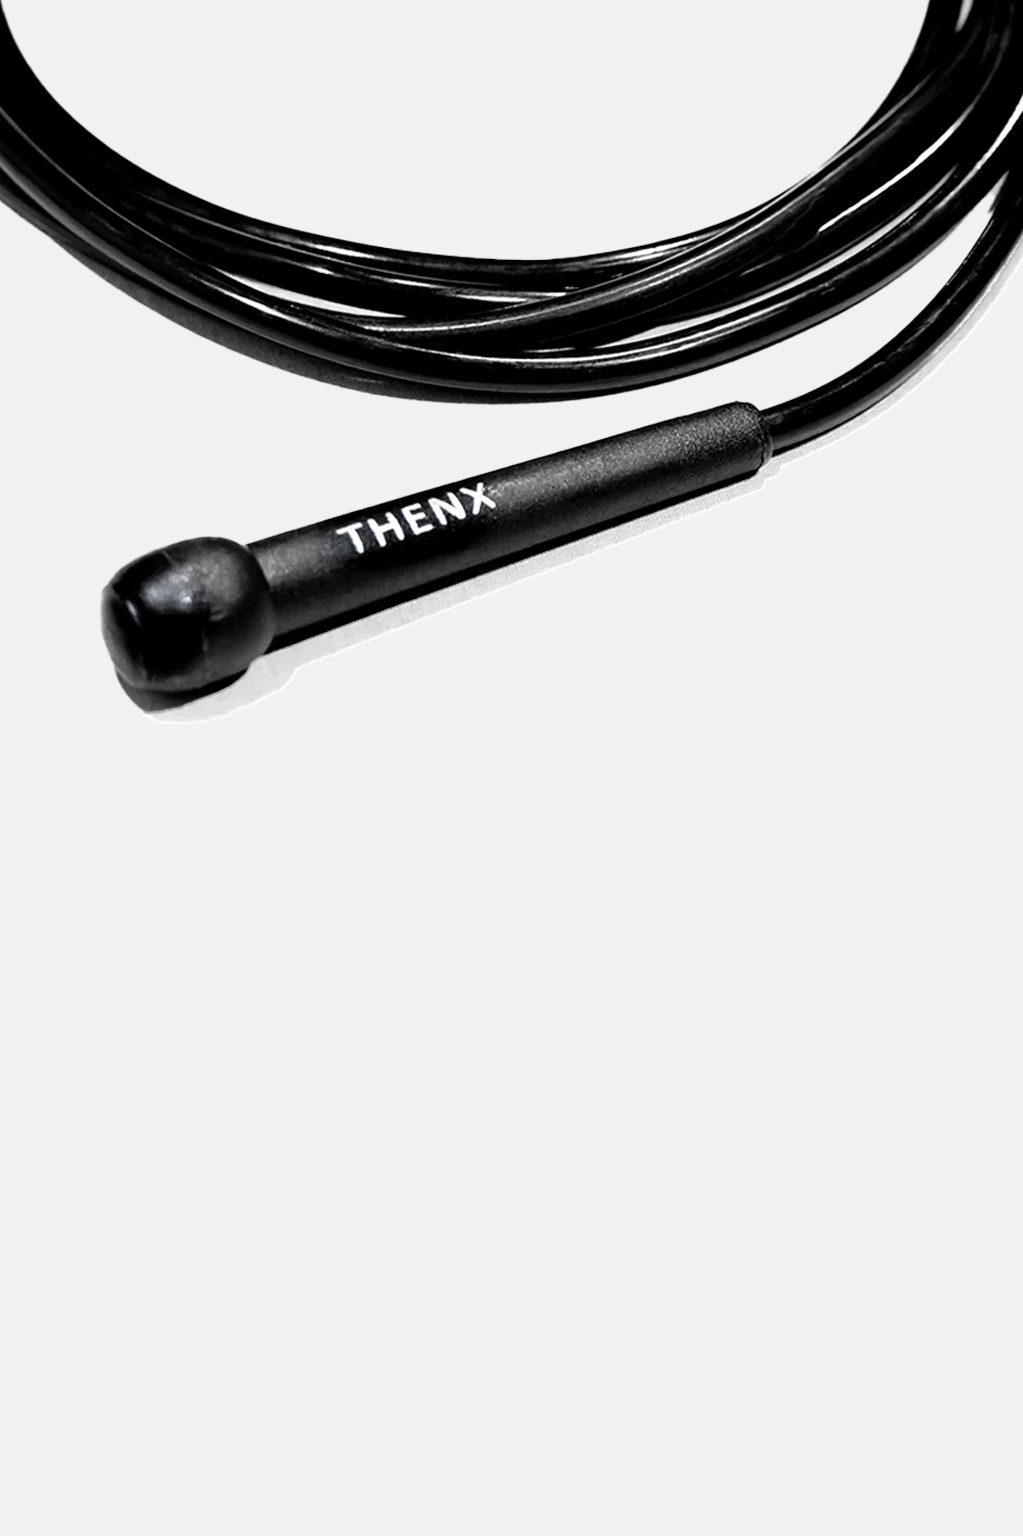 Thenx Jump rope - THENX